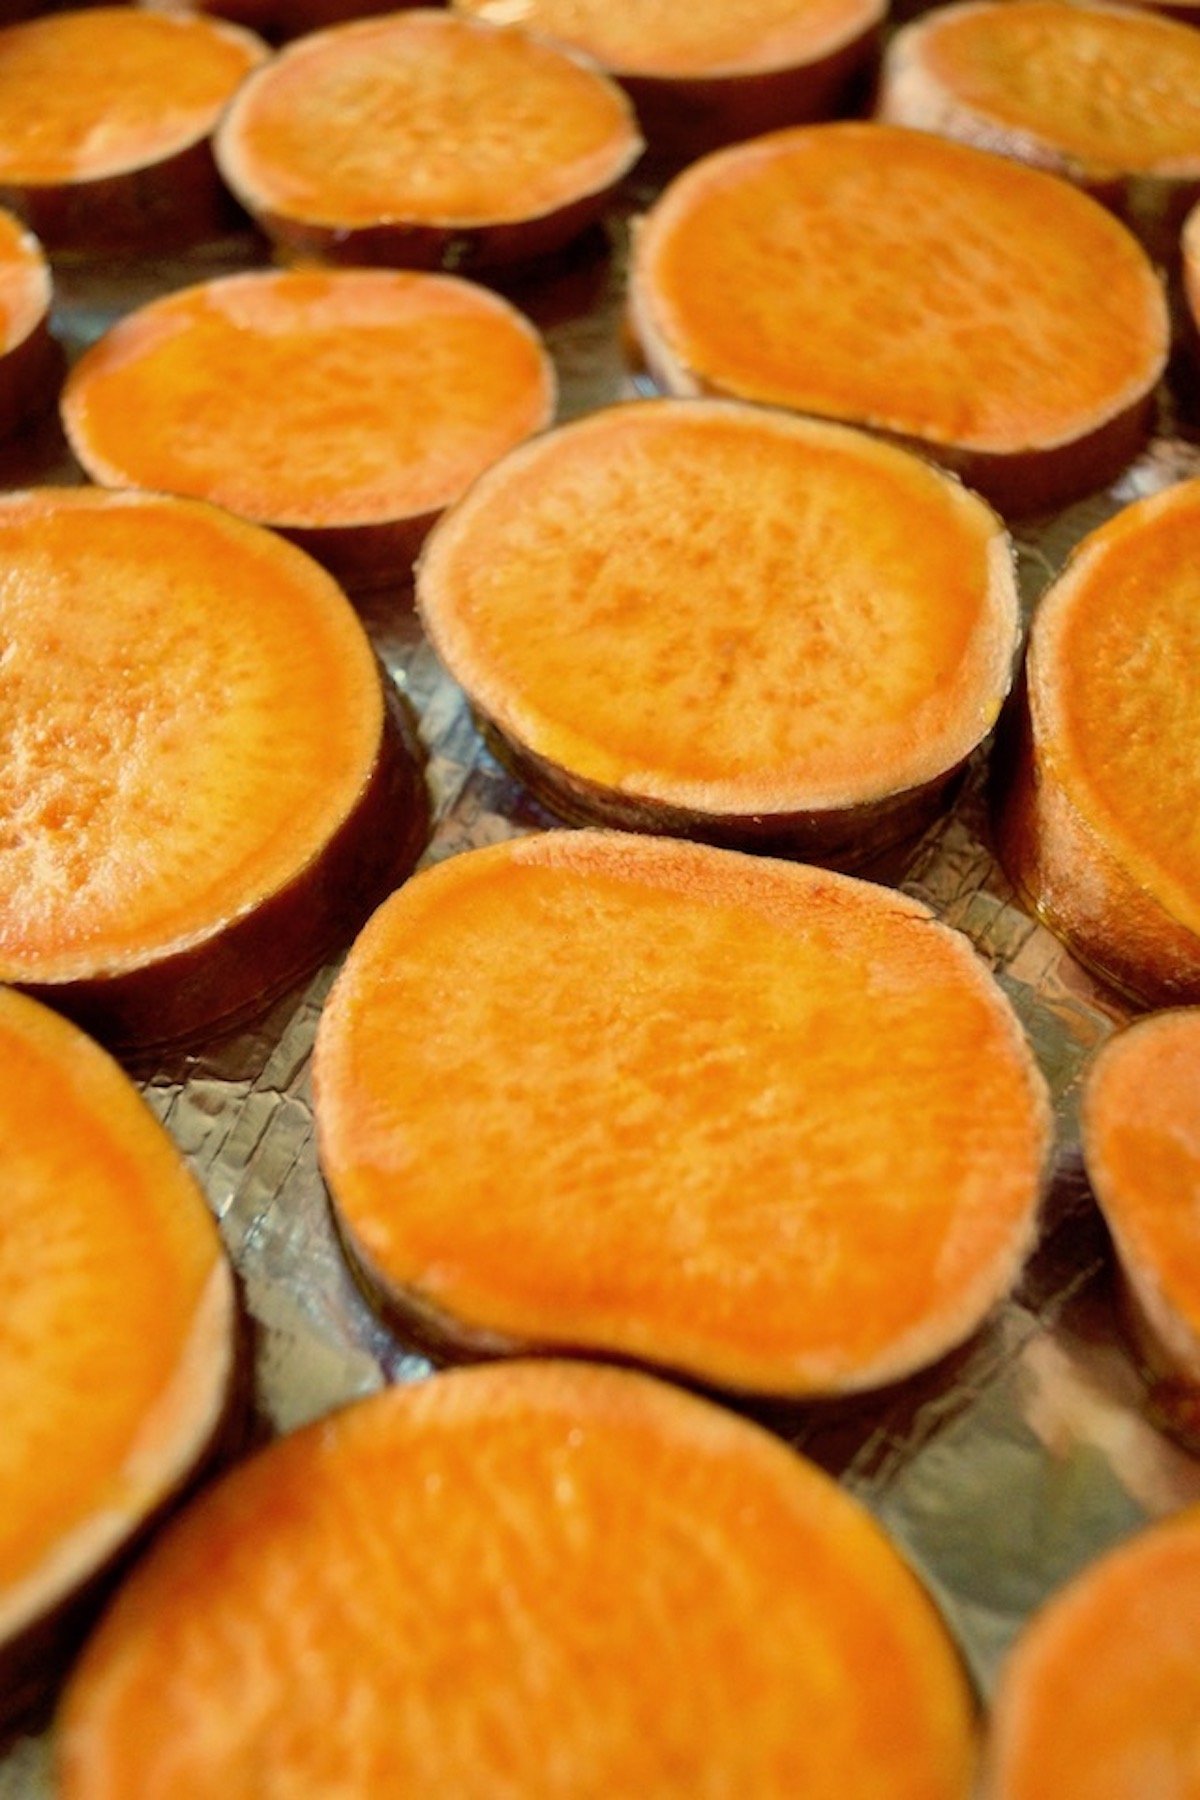 Several slices of sweet potatoes on a foil-lined baking sheet.